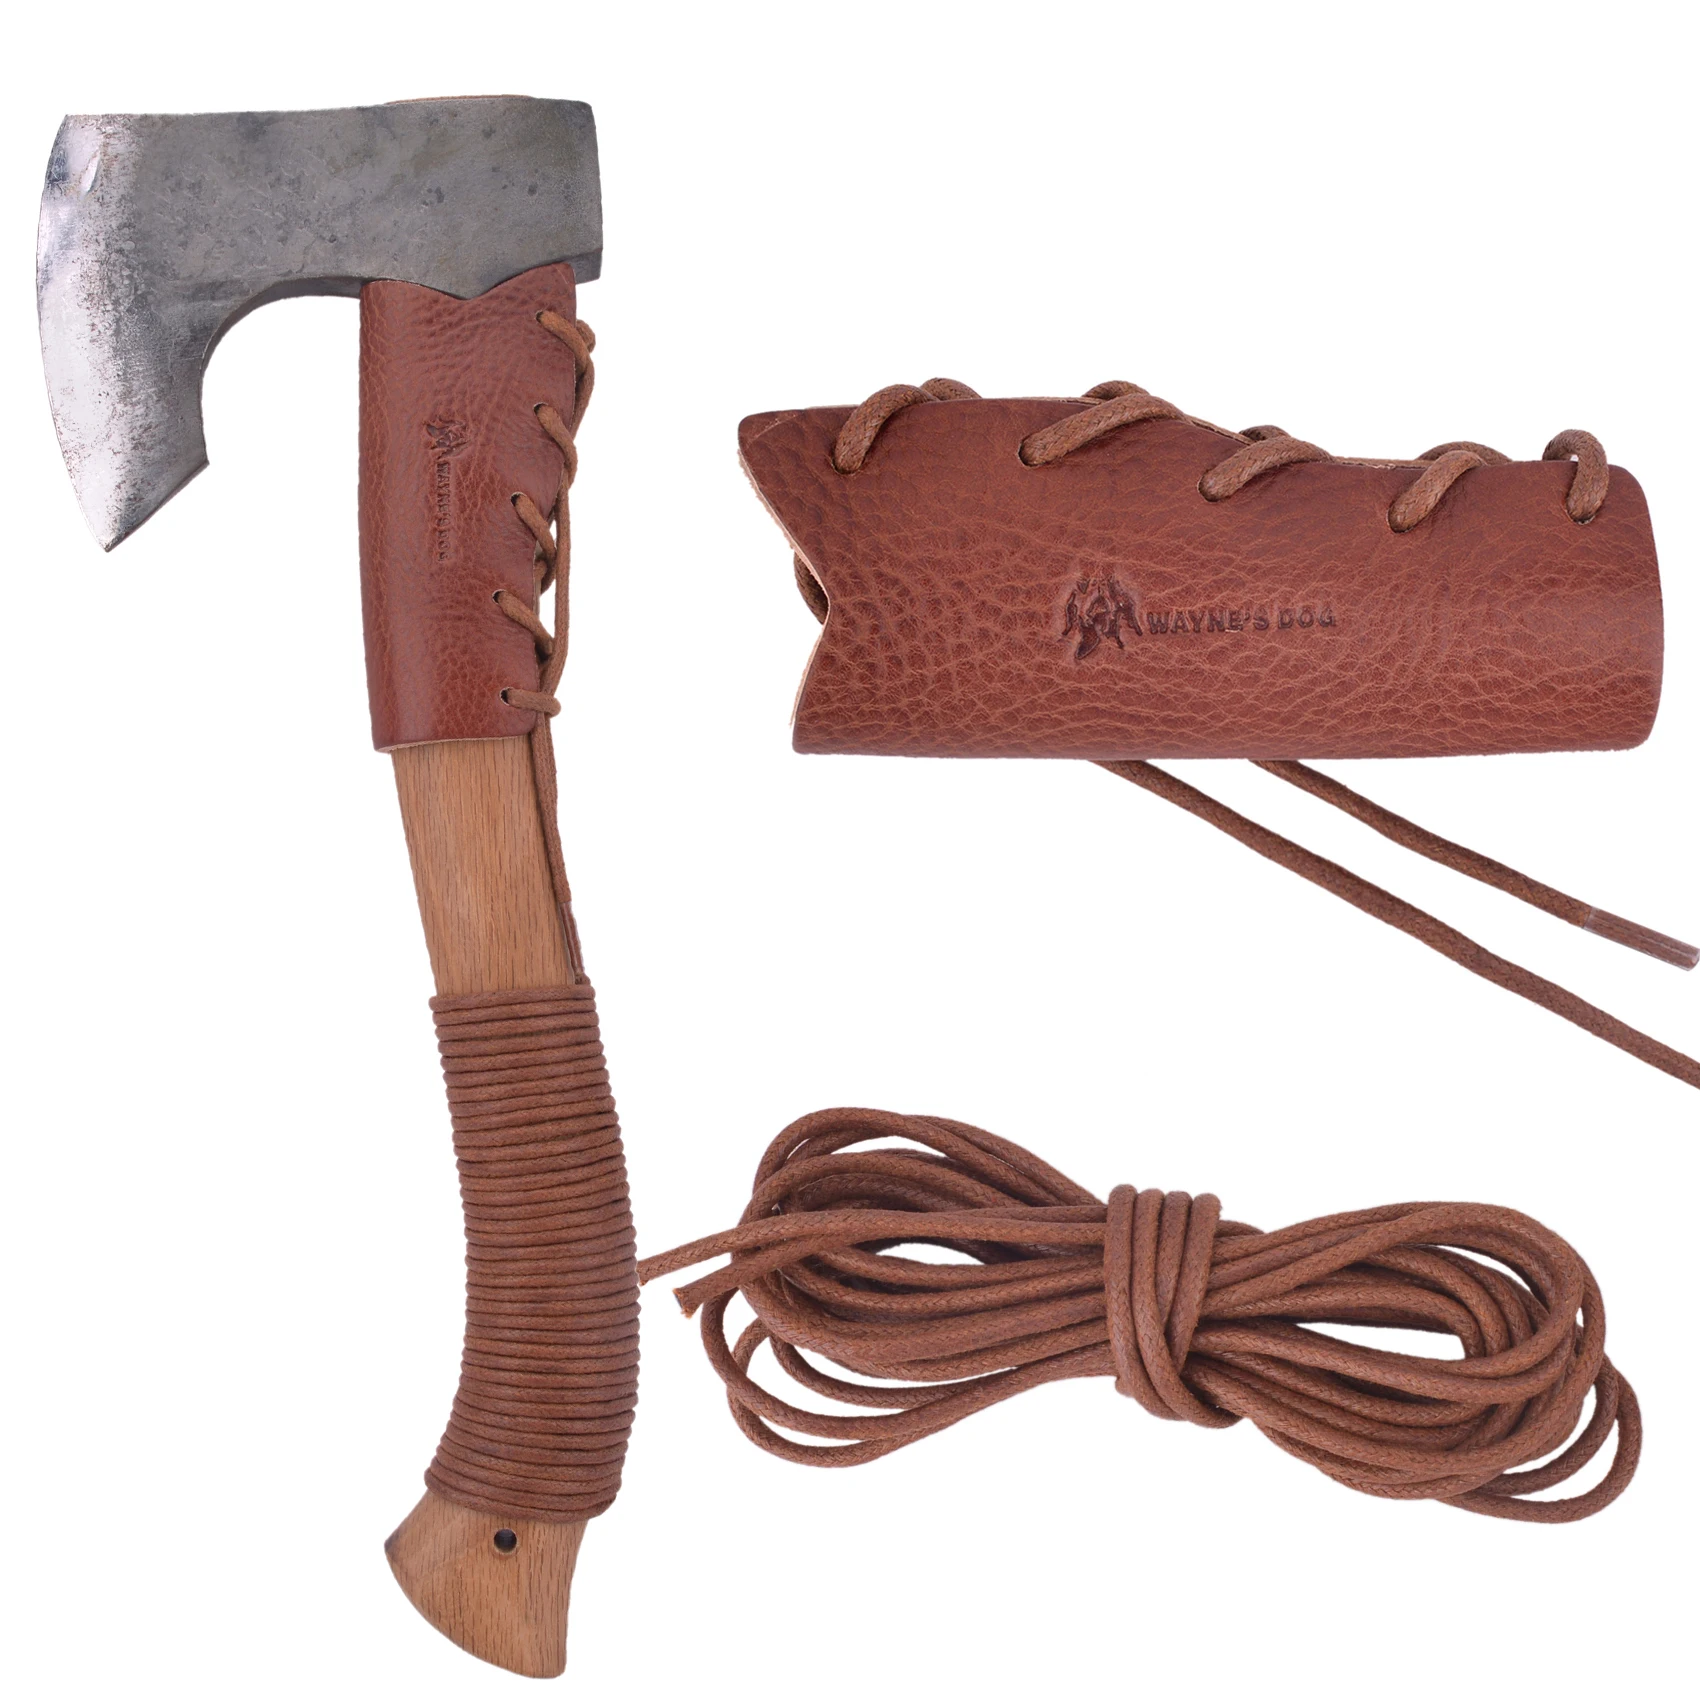 Set of Leather Axe Collar Guard, Axe Handle Wraps Covers for